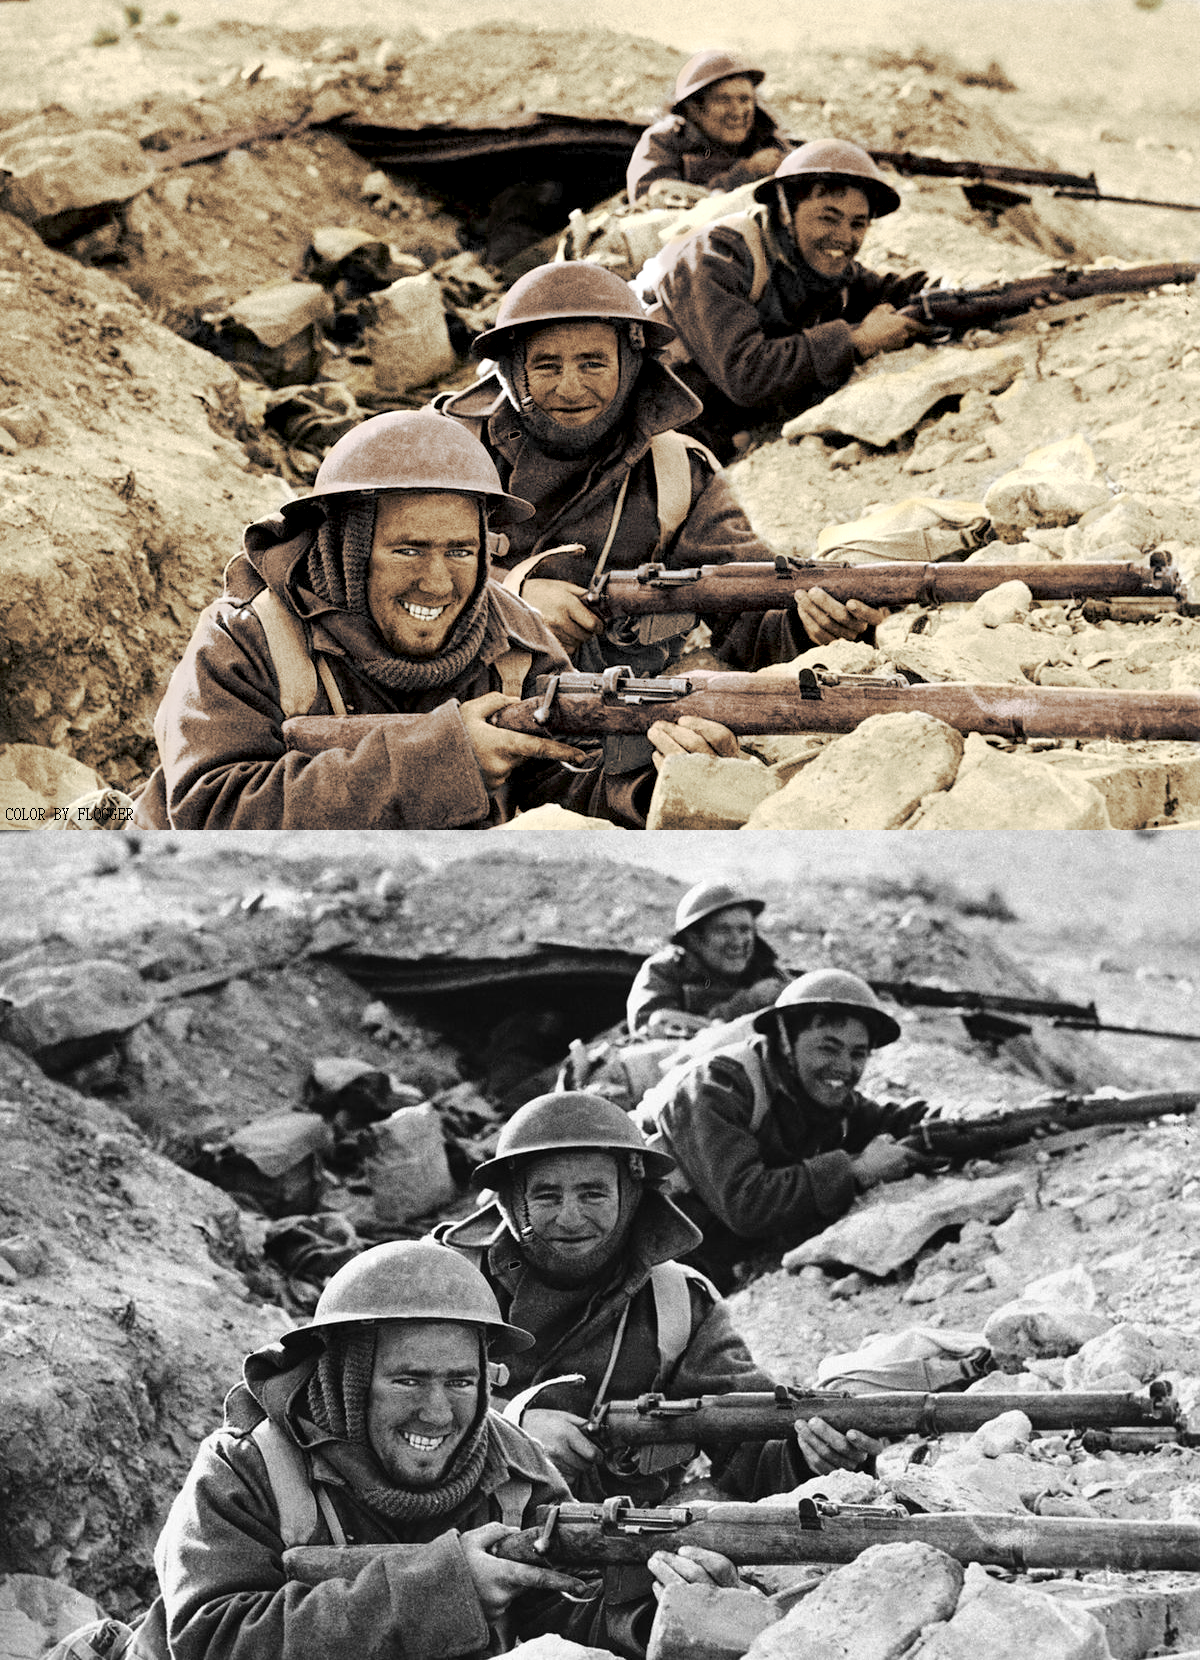 Post epic pictures of battles during ww2 - Page 10 - Photo and Video